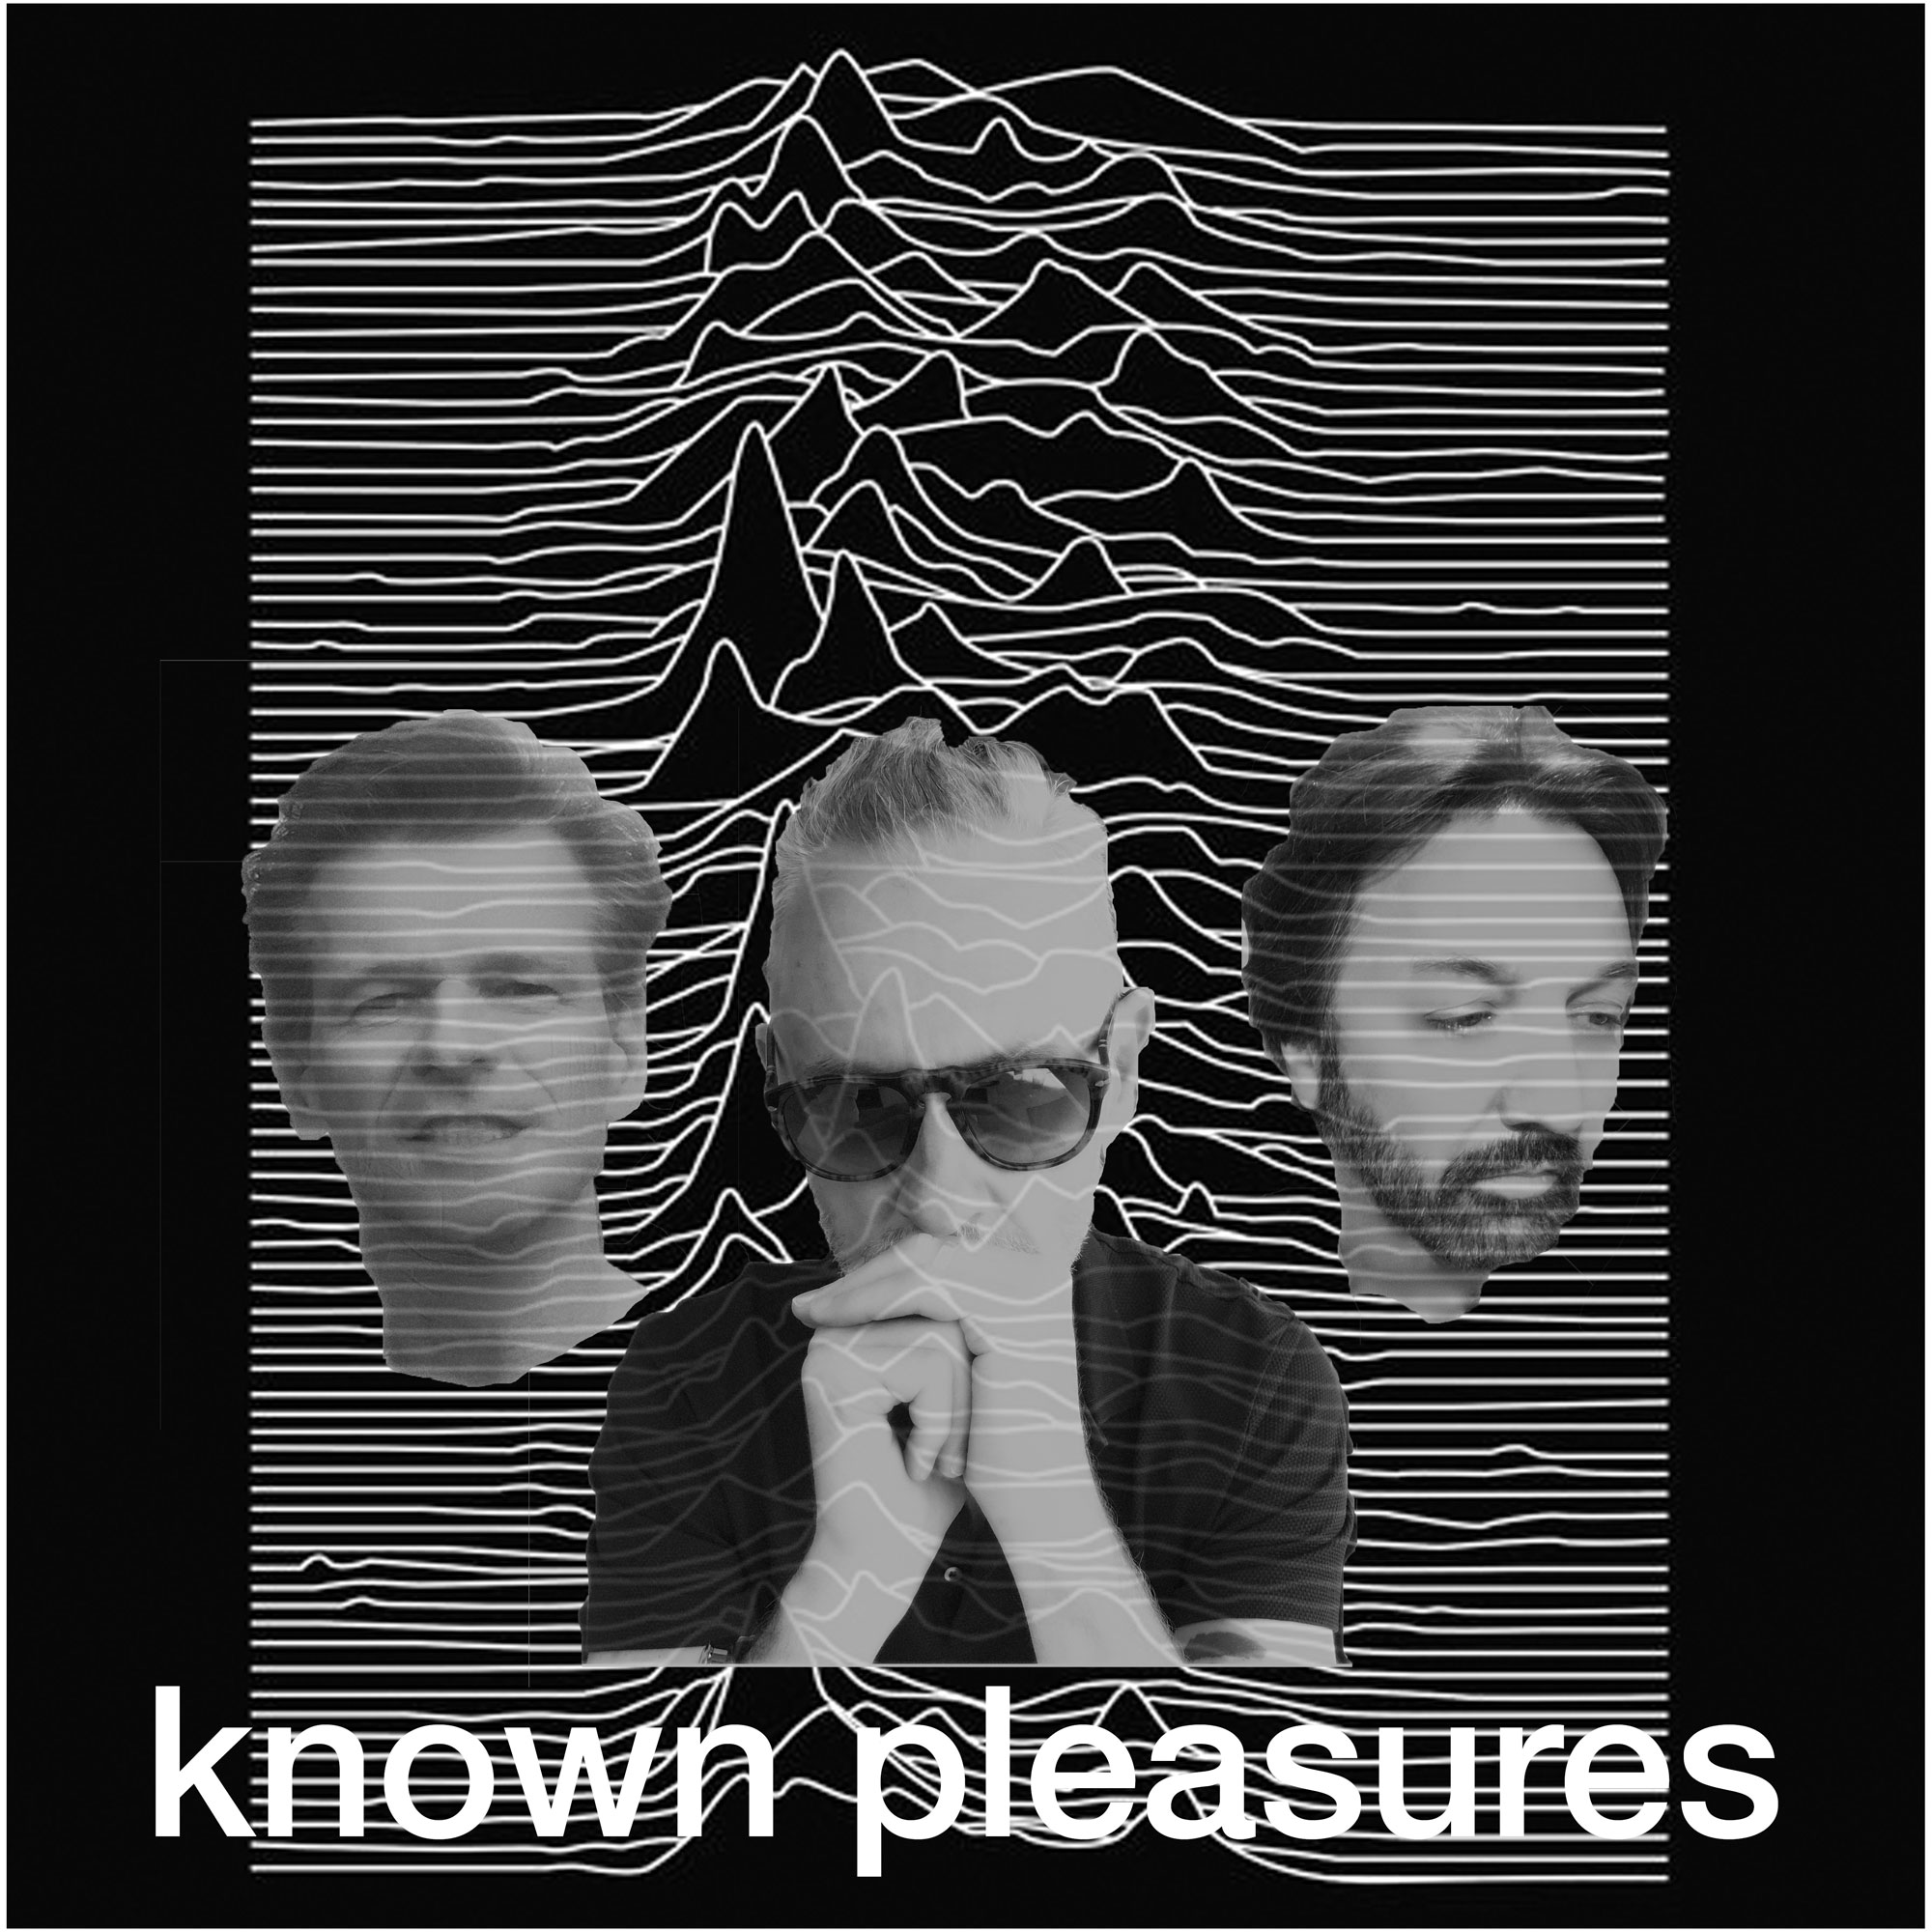 Known Pleasures Ep 5 - The Police